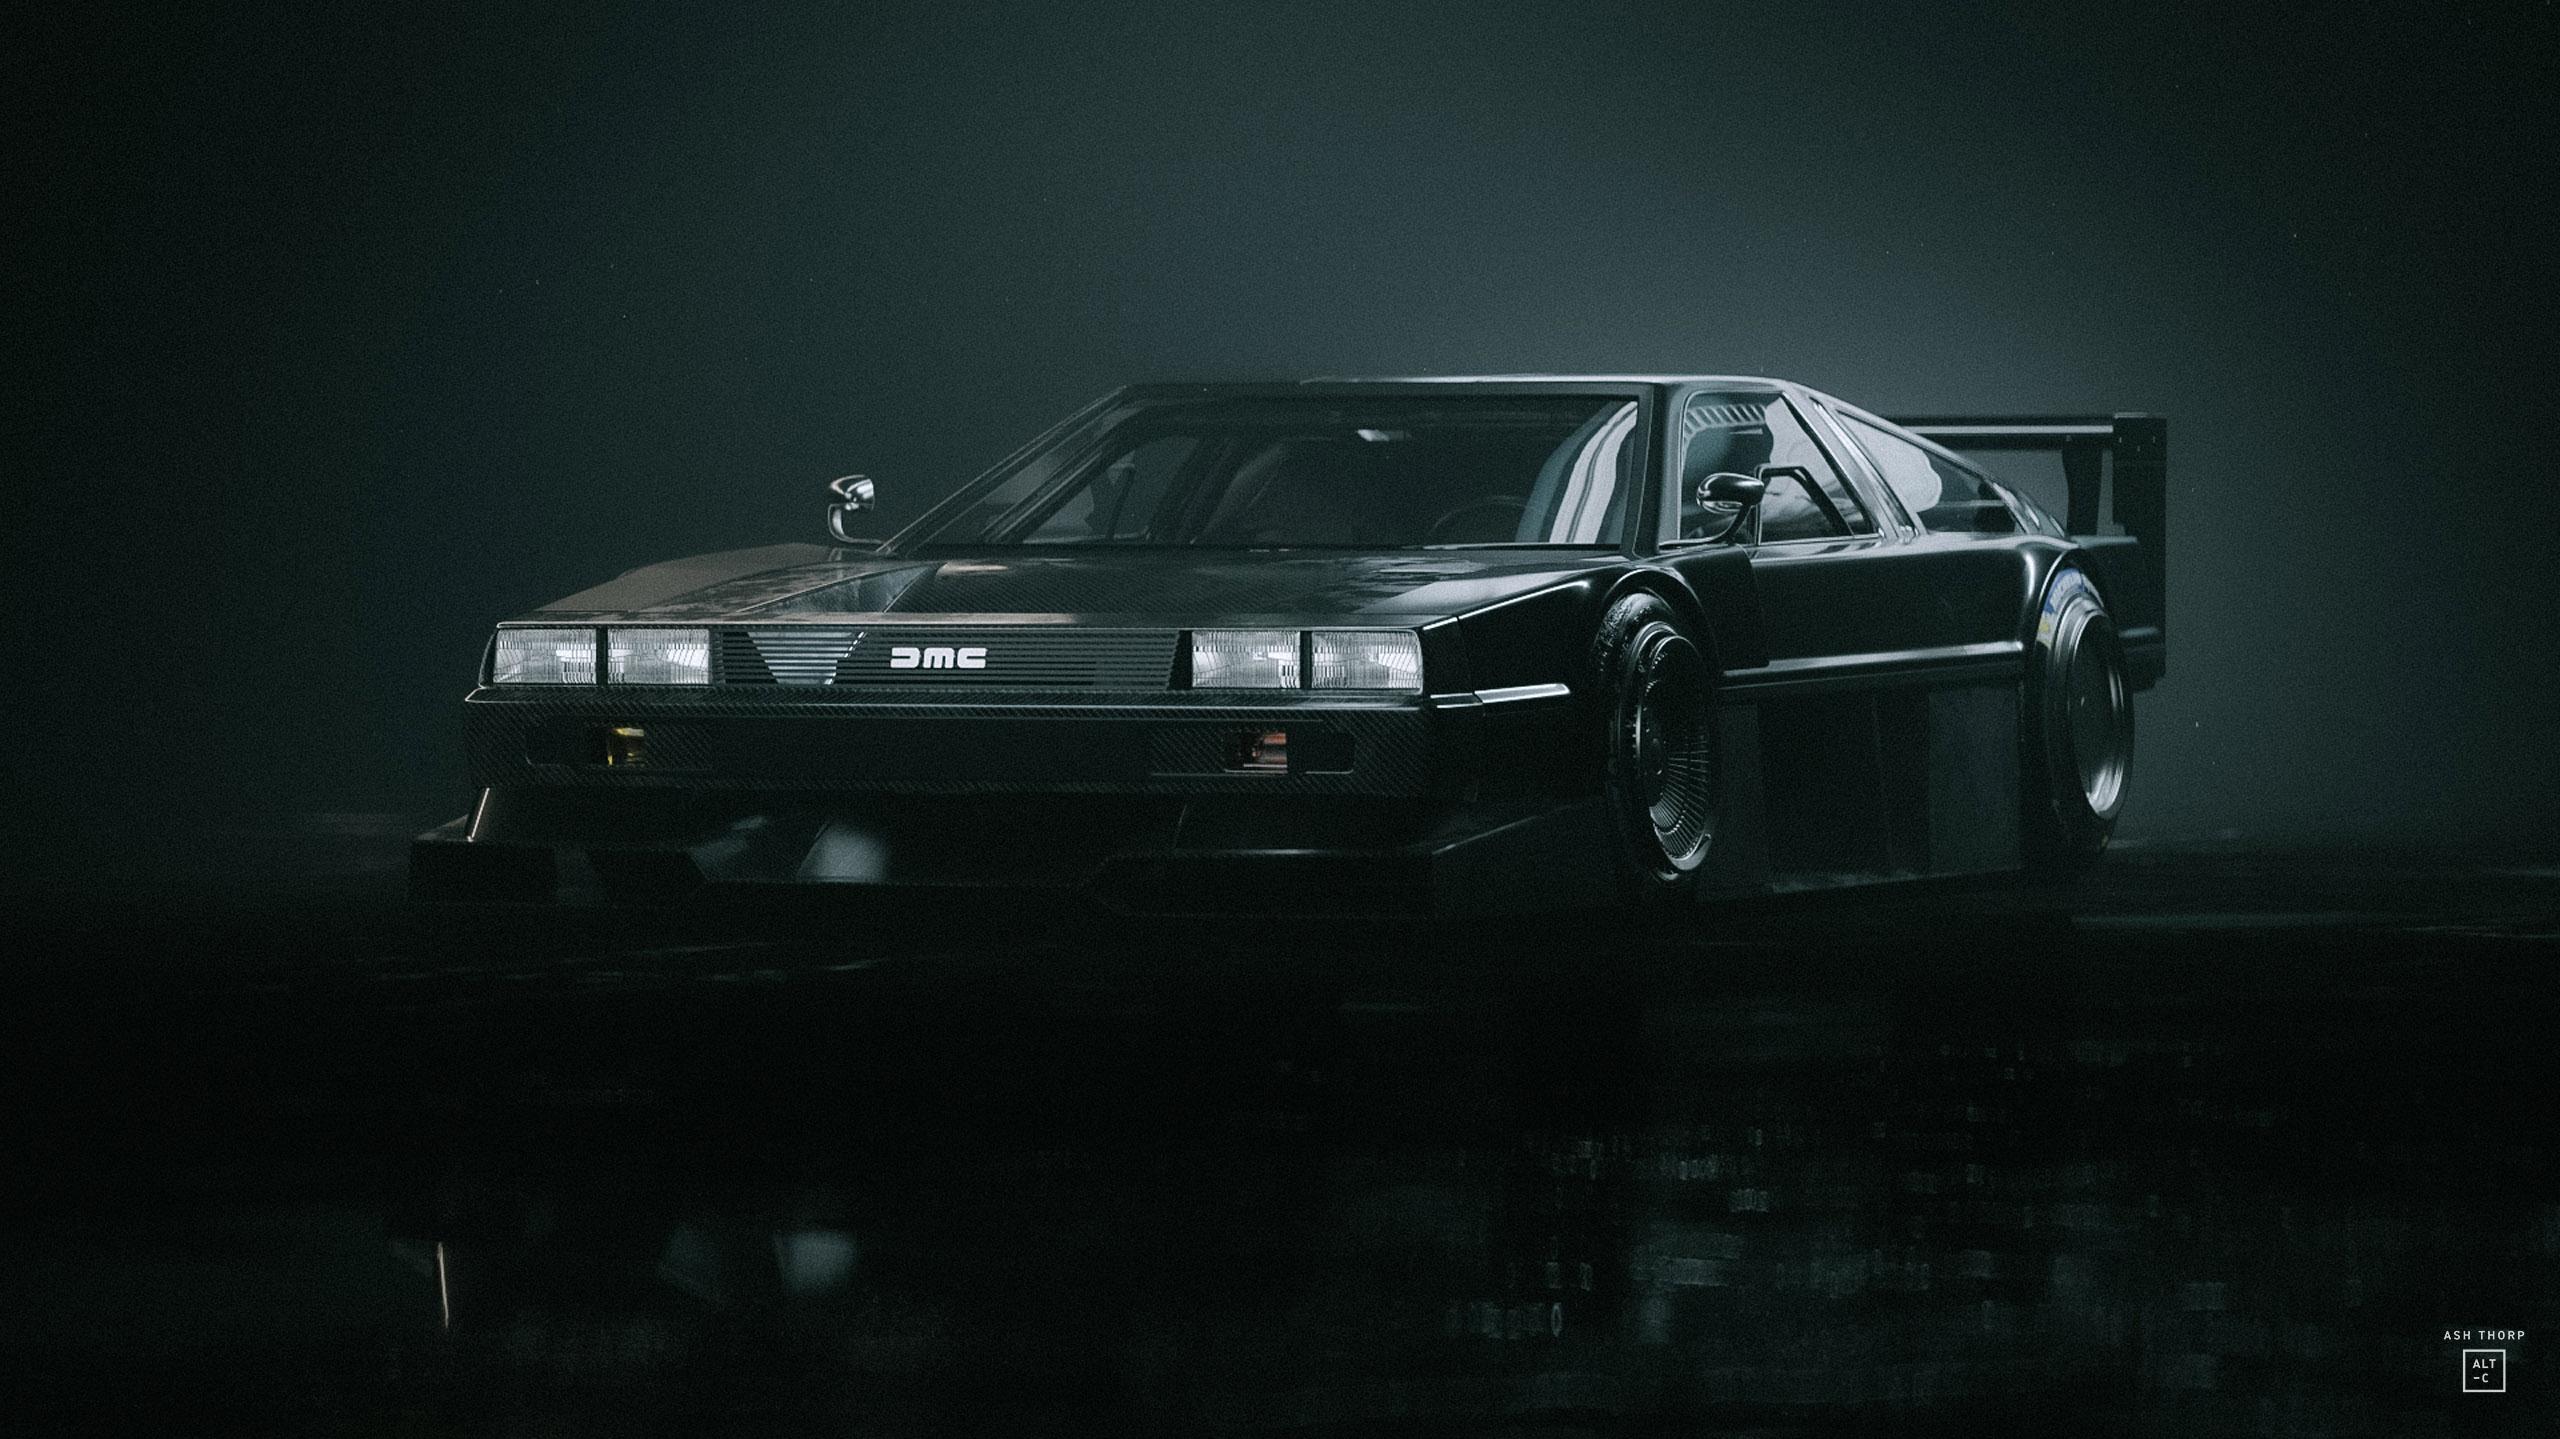 From Time Travel To Attack A Delorean Dmc As Envisioned